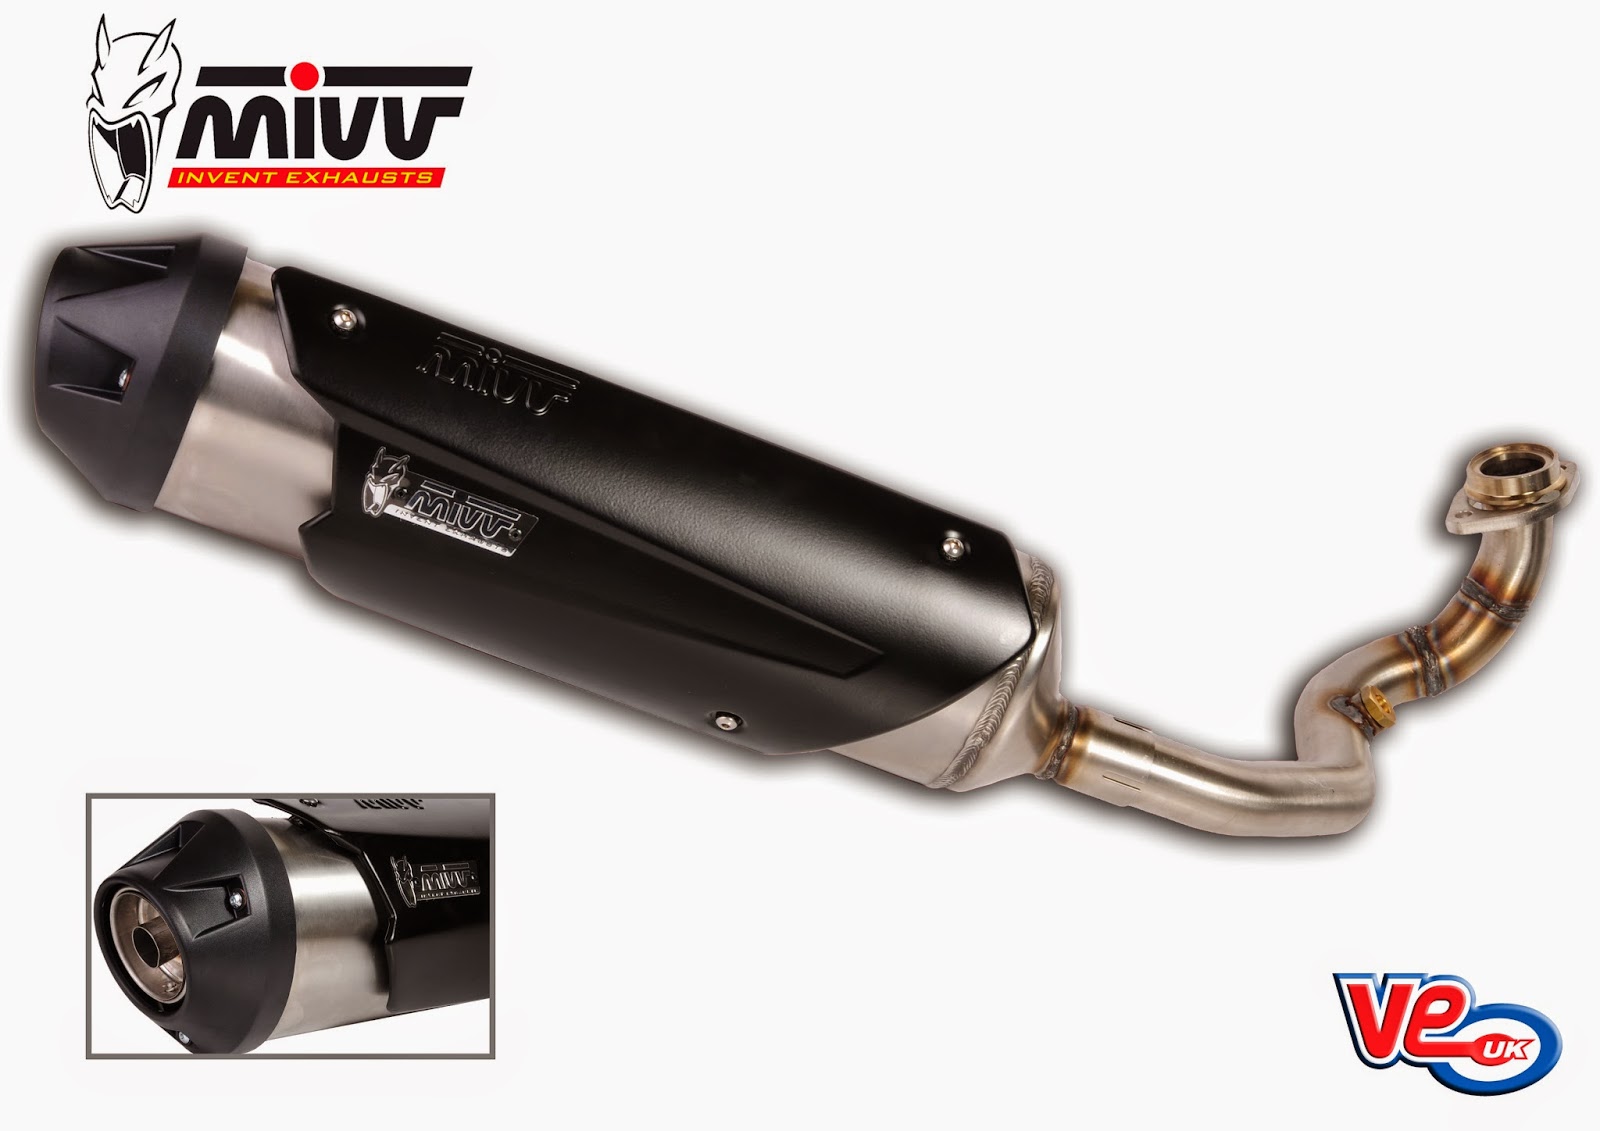 VE Scooter Spares: NEW - Mivv Urban Maxi Scooter Exhaust Systems